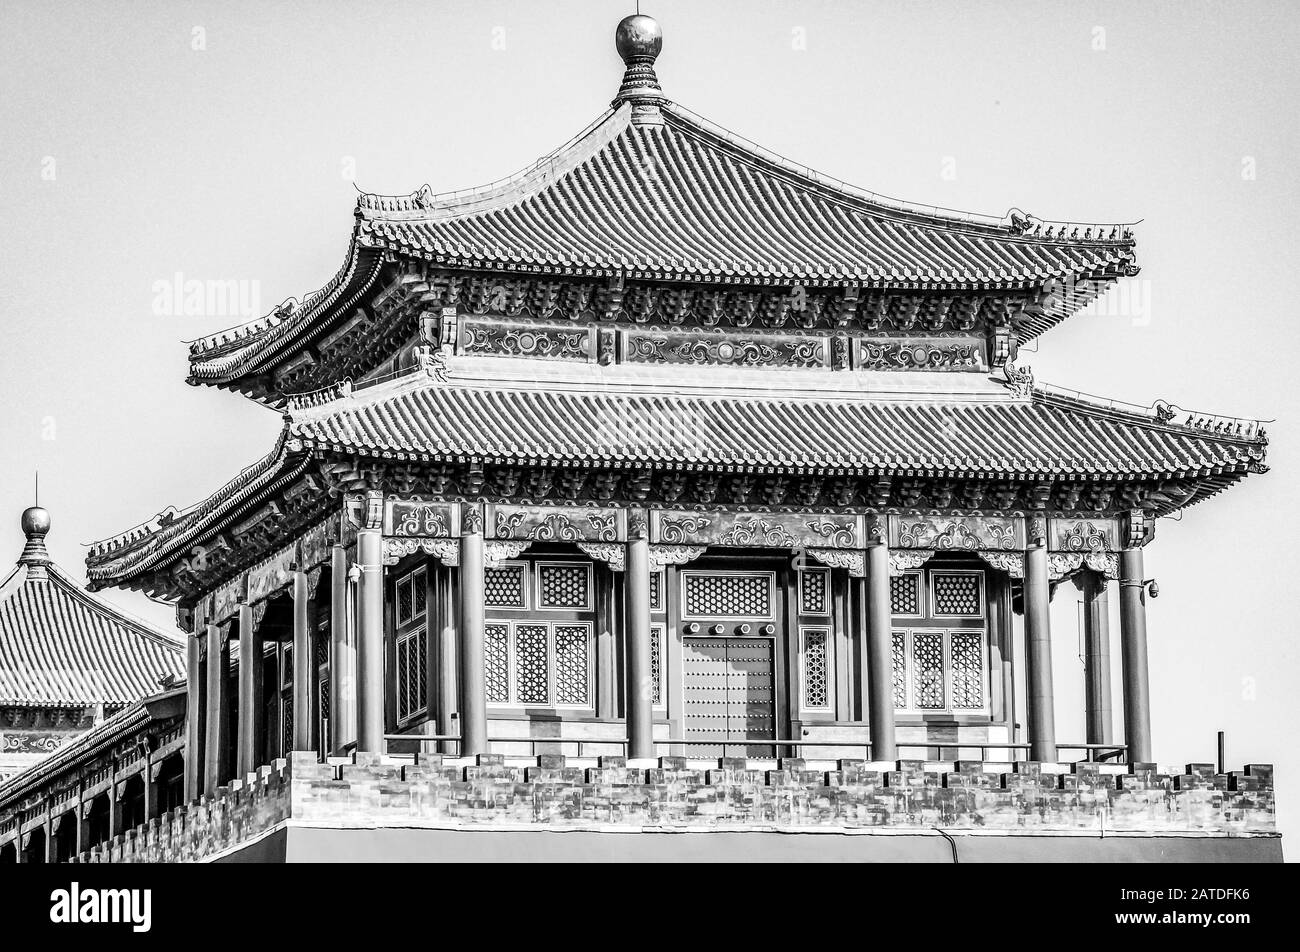 China, Beijing, Forbidden City Different design elements of the colorful buildings rooftops closeup details. Stock Photo